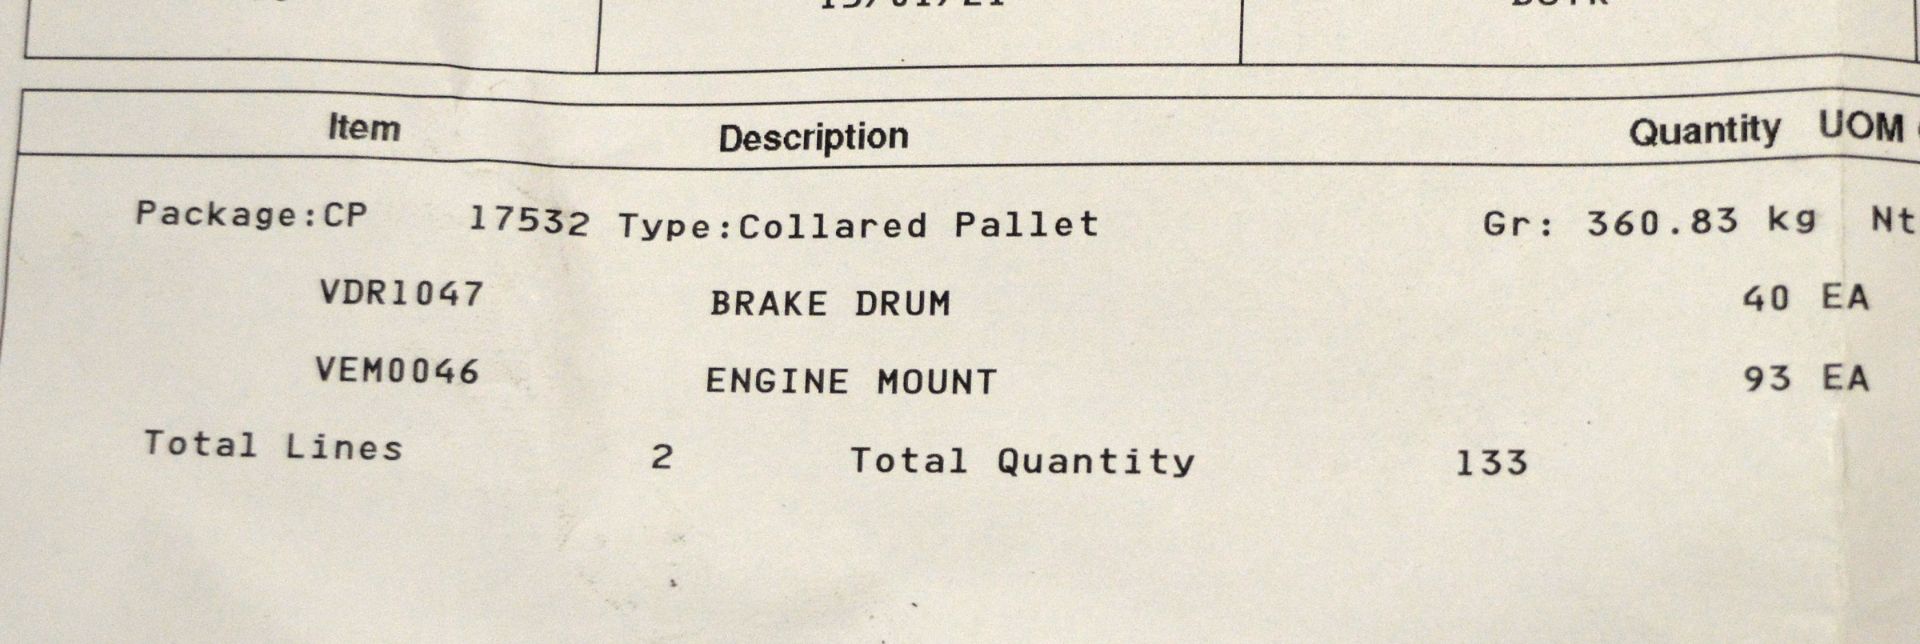 Vehicle parts - brake drums, engine mounts - see picture for itinerary for model numbers - Image 6 of 6